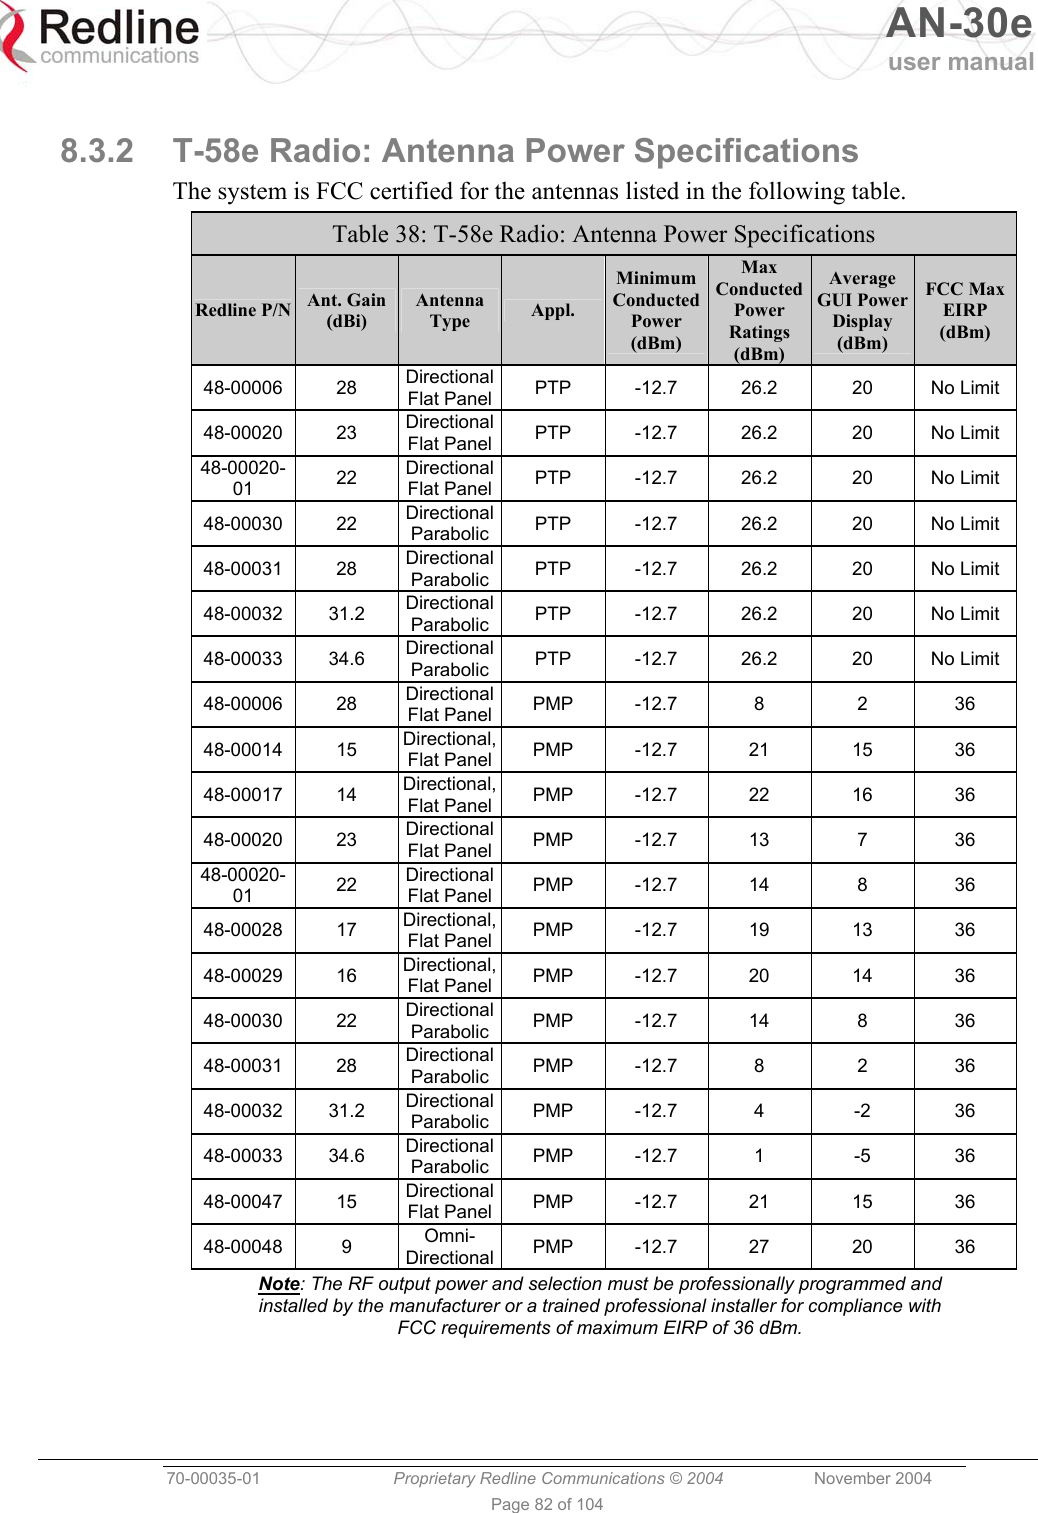   AN-30e user manual  70-00035-01  Proprietary Redline Communications © 2004 November 2004   Page 82 of 104  8.3.2  T-58e Radio: Antenna Power Specifications The system is FCC certified for the antennas listed in the following table. Table 38: T-58e Radio: Antenna Power Specifications Redline P/N  Ant. Gain (dBi) Antenna Type  Appl. Minimum Conducted Power (dBm) Max Conducted Power Ratings (dBm) Average GUI Power Display (dBm) FCC Max EIRP (dBm) 48-00006 28 Directional Flat Panel PTP -12.7 26.2  20 No Limit 48-00020 23 Directional Flat Panel PTP -12.7 26.2  20 No Limit 48-00020-01  22  Directional Flat Panel PTP -12.7 26.2  20 No Limit 48-00030 22 Directional Parabolic  PTP -12.7 26.2  20 No Limit 48-00031 28 Directional Parabolic  PTP -12.7 26.2  20 No Limit 48-00032 31.2 Directional Parabolic  PTP -12.7 26.2  20 No Limit 48-00033 34.6 Directional Parabolic  PTP -12.7 26.2  20 No Limit 48-00006 28 Directional Flat Panel PMP -12.7  8  2  36 48-00014 15 Directional, Flat Panel PMP -12.7  21  15  36 48-00017 14 Directional, Flat Panel PMP -12.7  22  16  36 48-00020 23 Directional Flat Panel PMP -12.7  13  7  36 48-00020-01  22  Directional Flat Panel PMP -12.7  14  8  36 48-00028 17 Directional, Flat Panel PMP -12.7  19  13  36 48-00029 16 Directional, Flat Panel PMP -12.7  20  14  36 48-00030 22 Directional Parabolic  PMP -12.7  14  8  36 48-00031 28 Directional Parabolic  PMP -12.7  8  2  36 48-00032 31.2 Directional Parabolic  PMP -12.7  4  -2  36 48-00033 34.6 Directional Parabolic  PMP -12.7  1  -5  36 48-00047 15 Directional Flat Panel  PMP -12.7  21  15  36 48-00048 9  Omni- Directional PMP -12.7  27  20  36 Note: The RF output power and selection must be professionally programmed and installed by the manufacturer or a trained professional installer for compliance with FCC requirements of maximum EIRP of 36 dBm. 